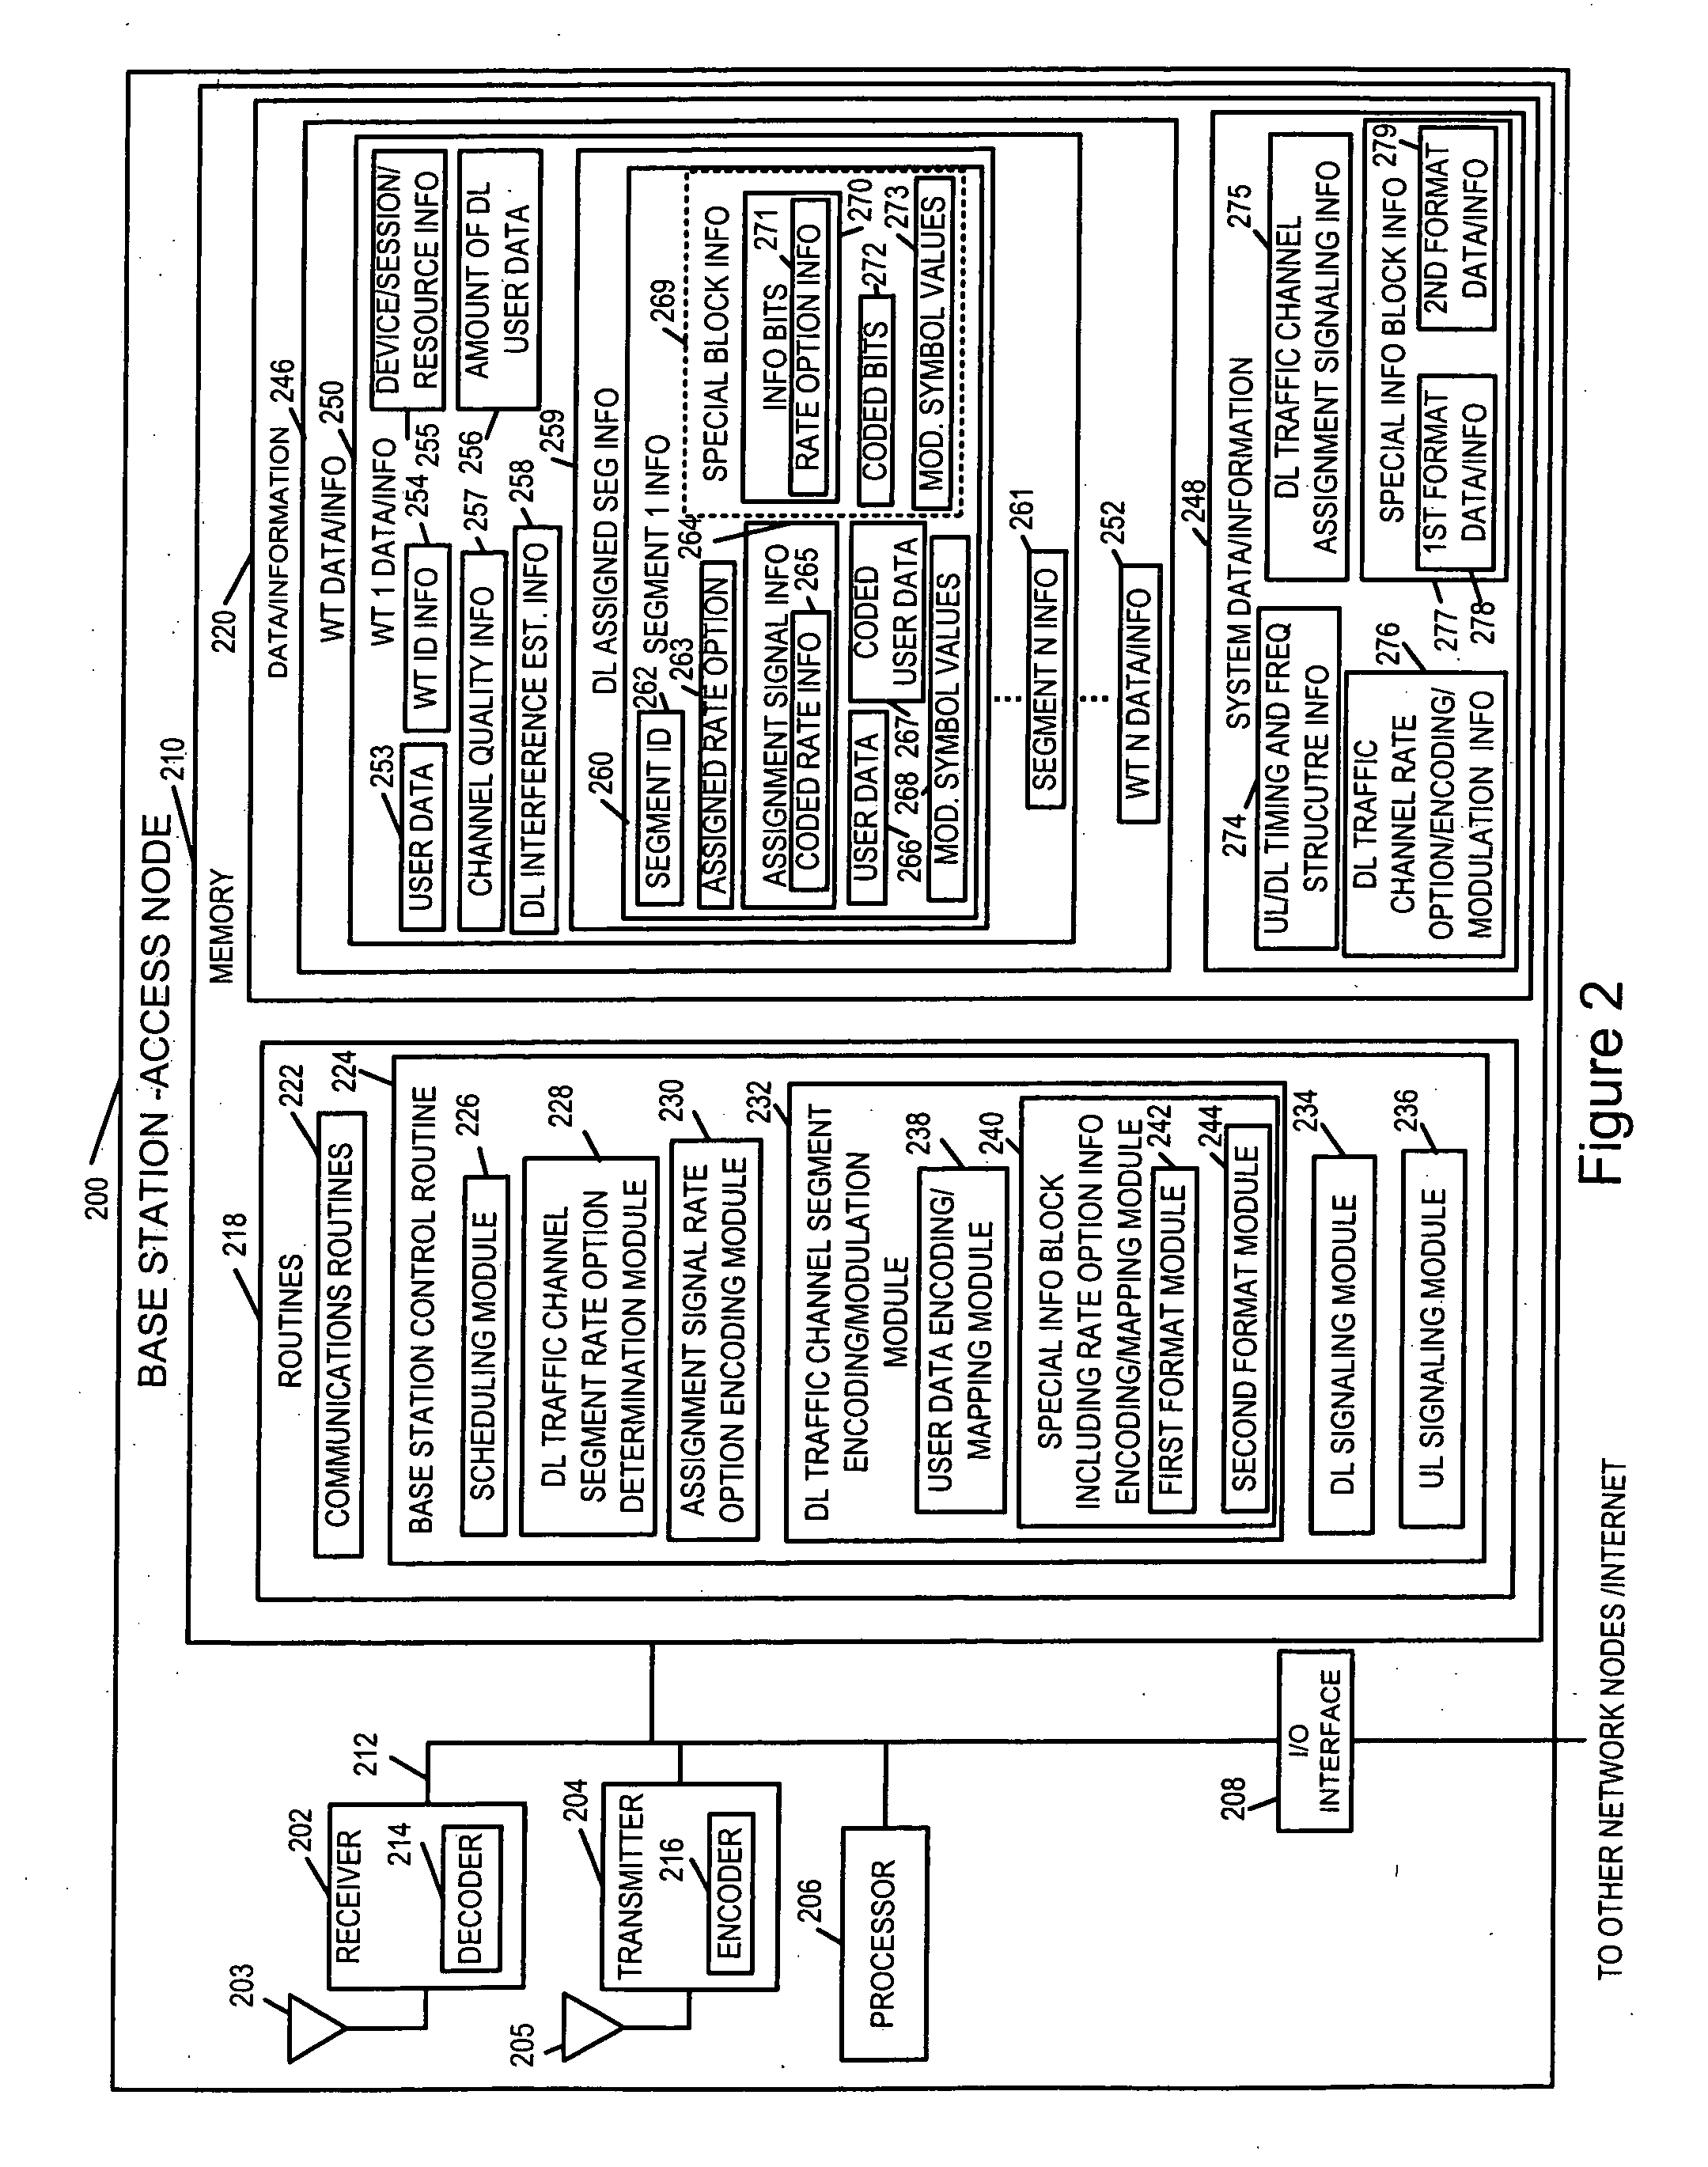 In-band rate indicator methods and apparatus